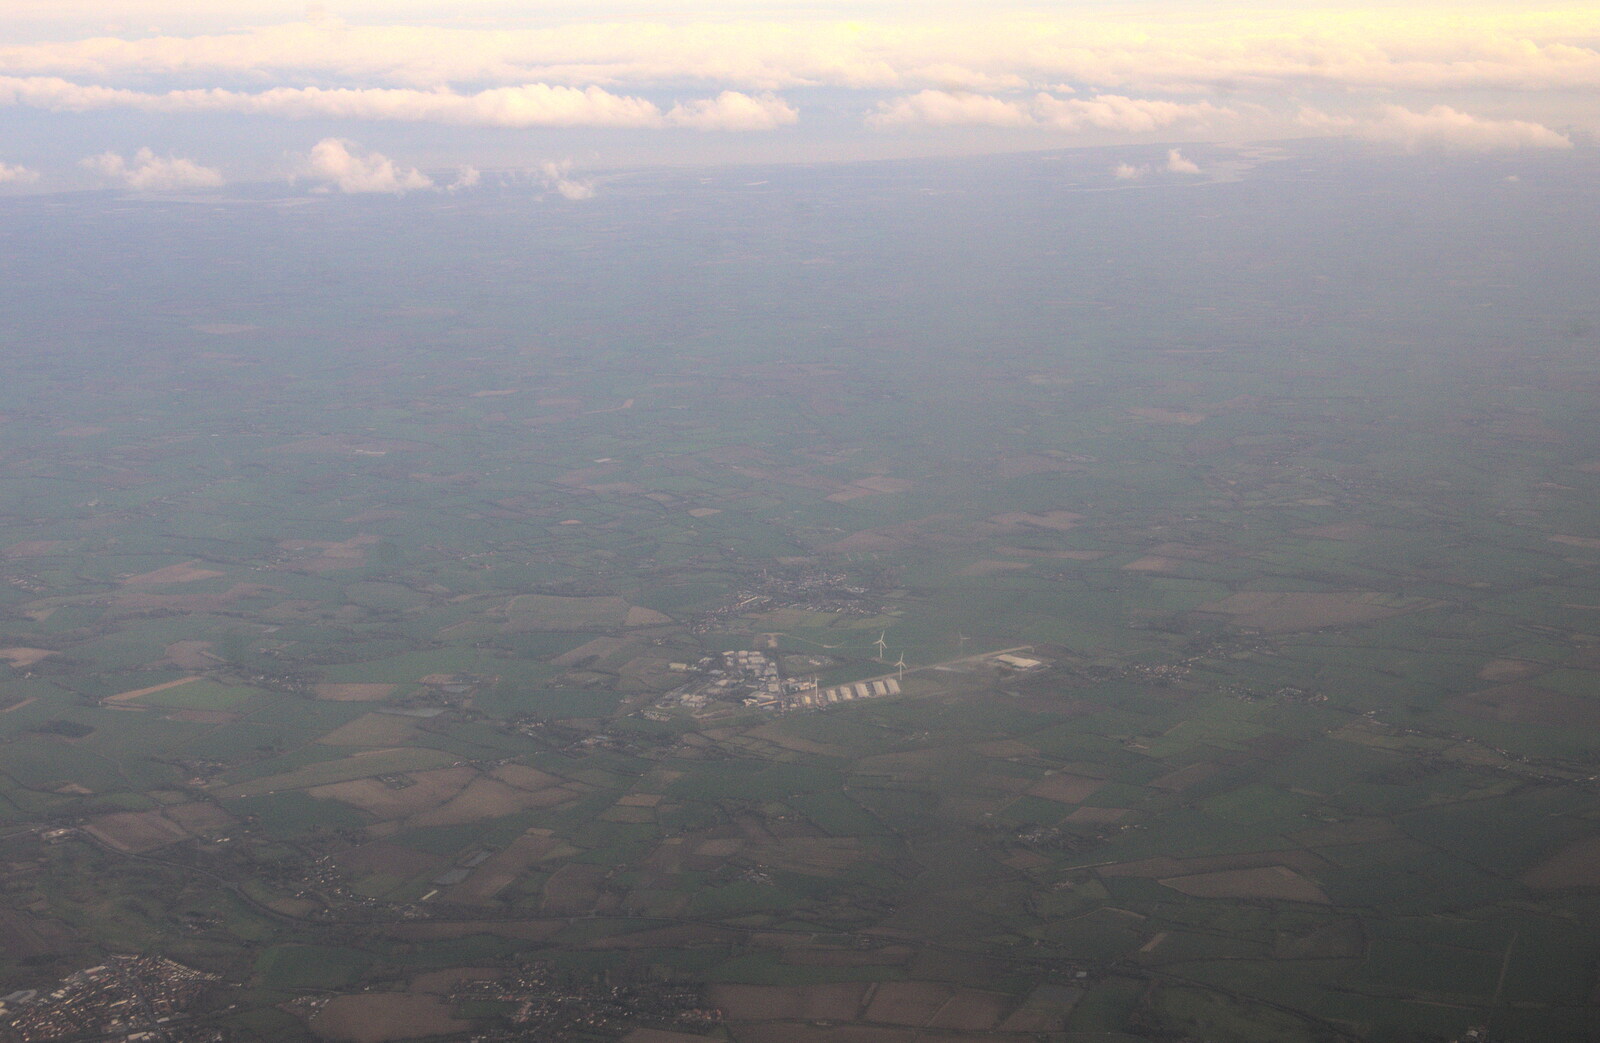 Eye Airfield, Diss, and the coastline in the distance from Devon In A Day, Exeter, Devon - 14th March 2019